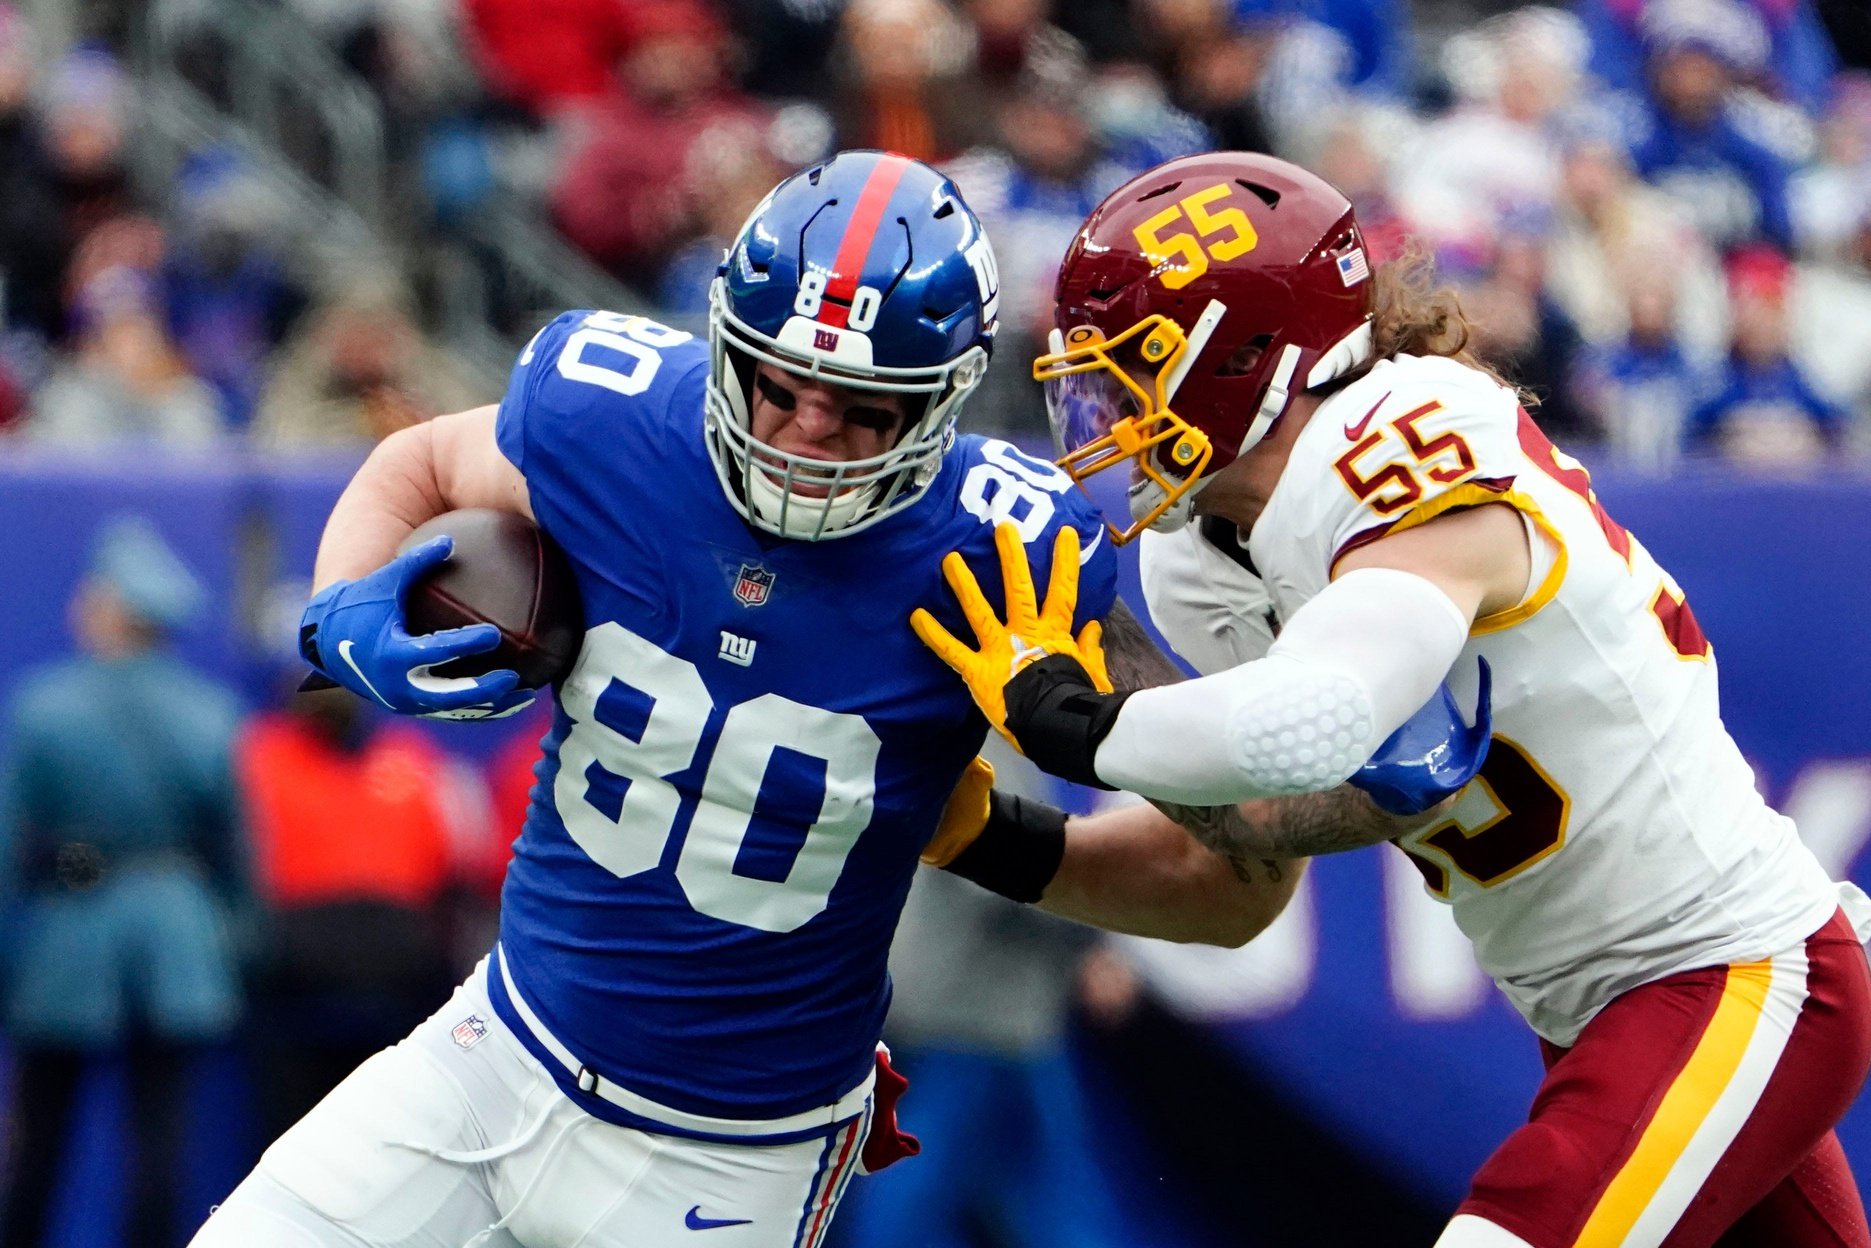 New York Giants defense dominates as they roll past the Carolina Panthers 25 -3